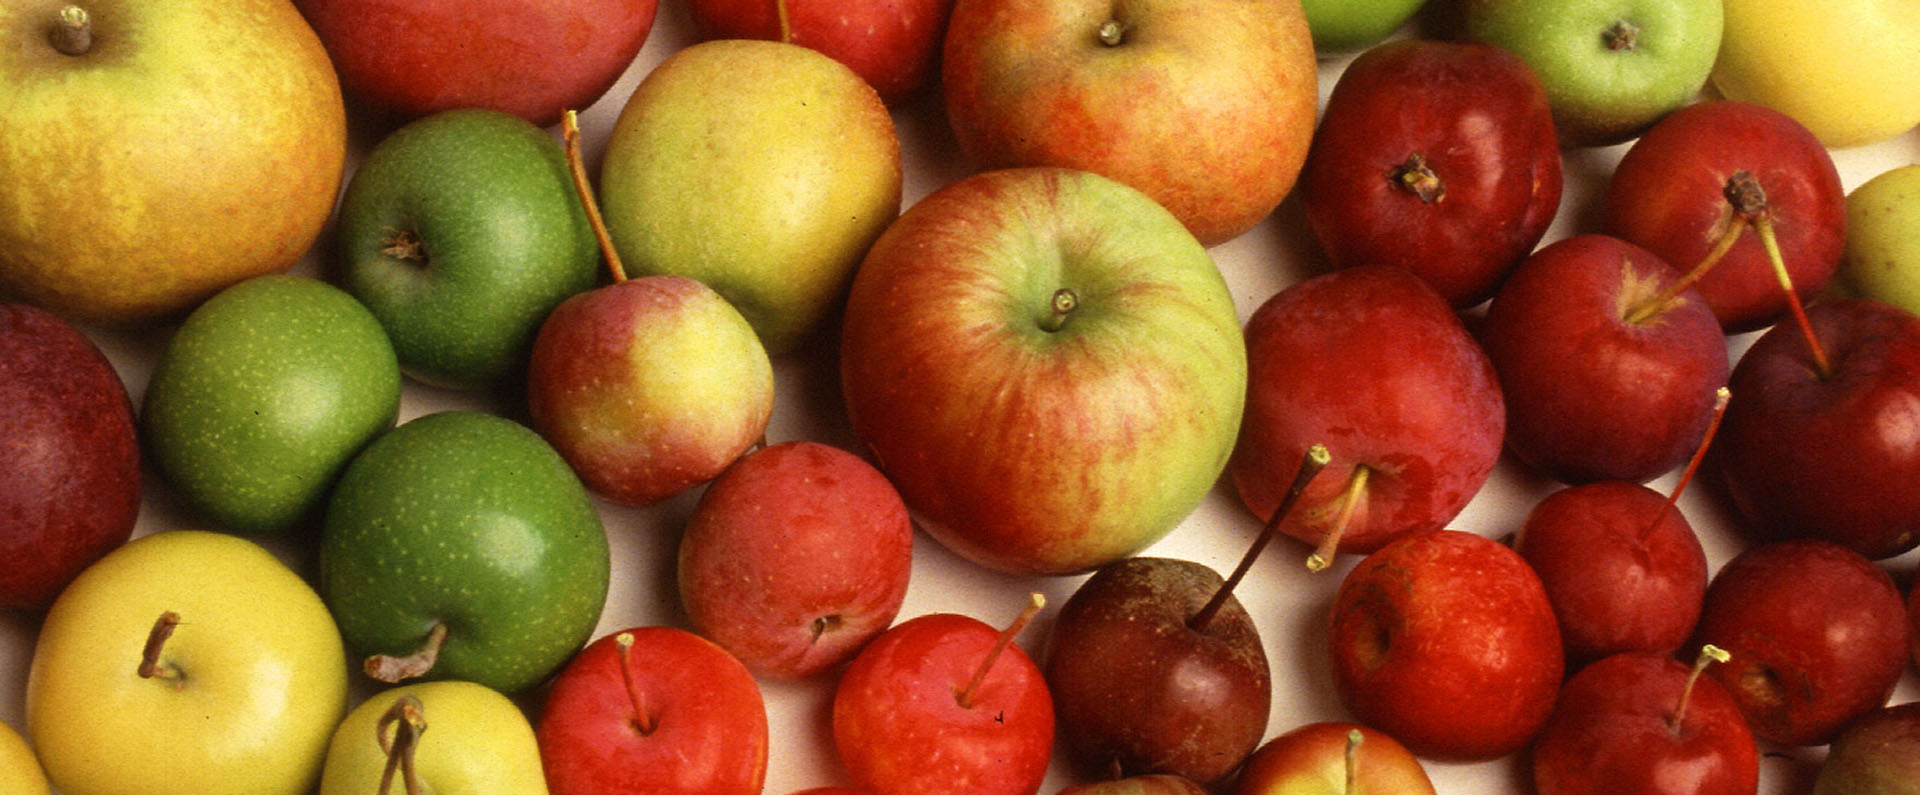 A variety of red, yellow and green apples